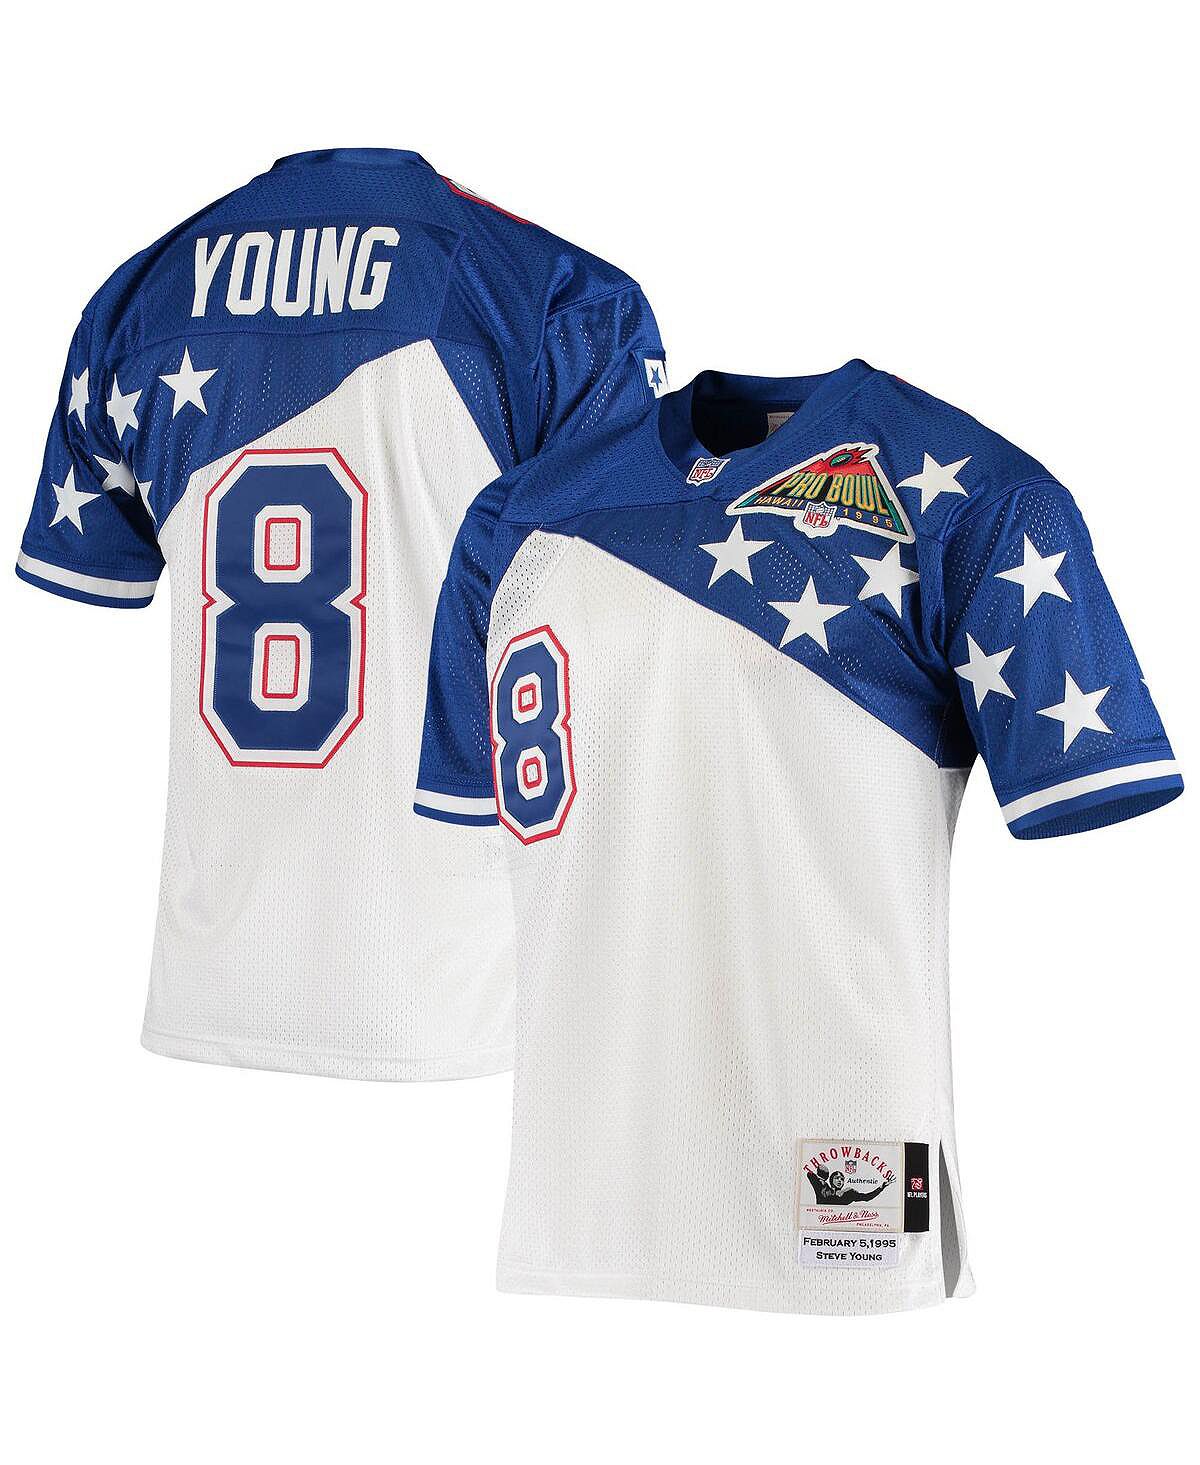 Мужская футболка steve young white, blue nfc 1994 pro bowl authentic jersey Mitchell & Ness, мульти мужская фирменная футболка scarlet san francisco 49ers 2022 nfc west division champions divide and conquer fanatics